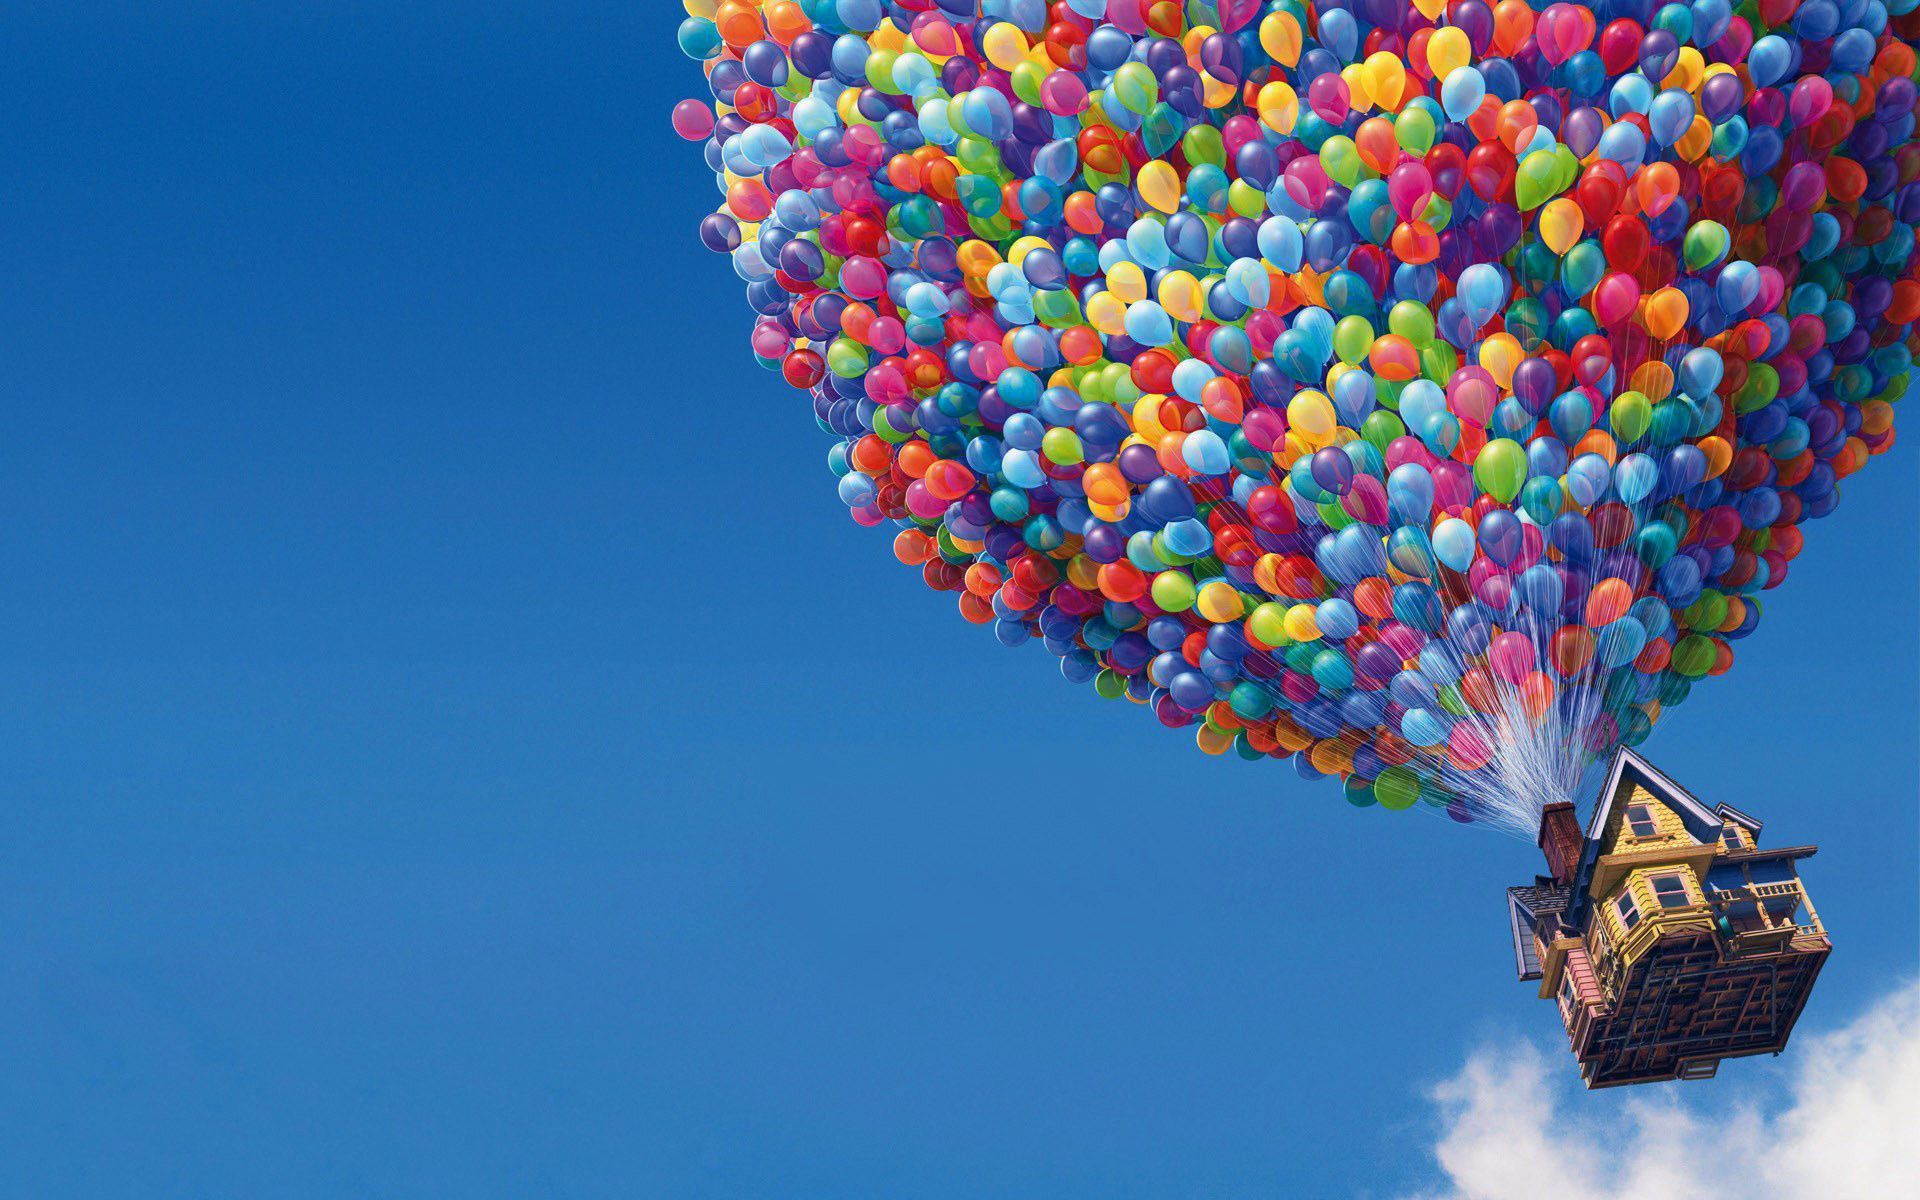 UP Movie Balloons House Wallpapers HD Backgrounds